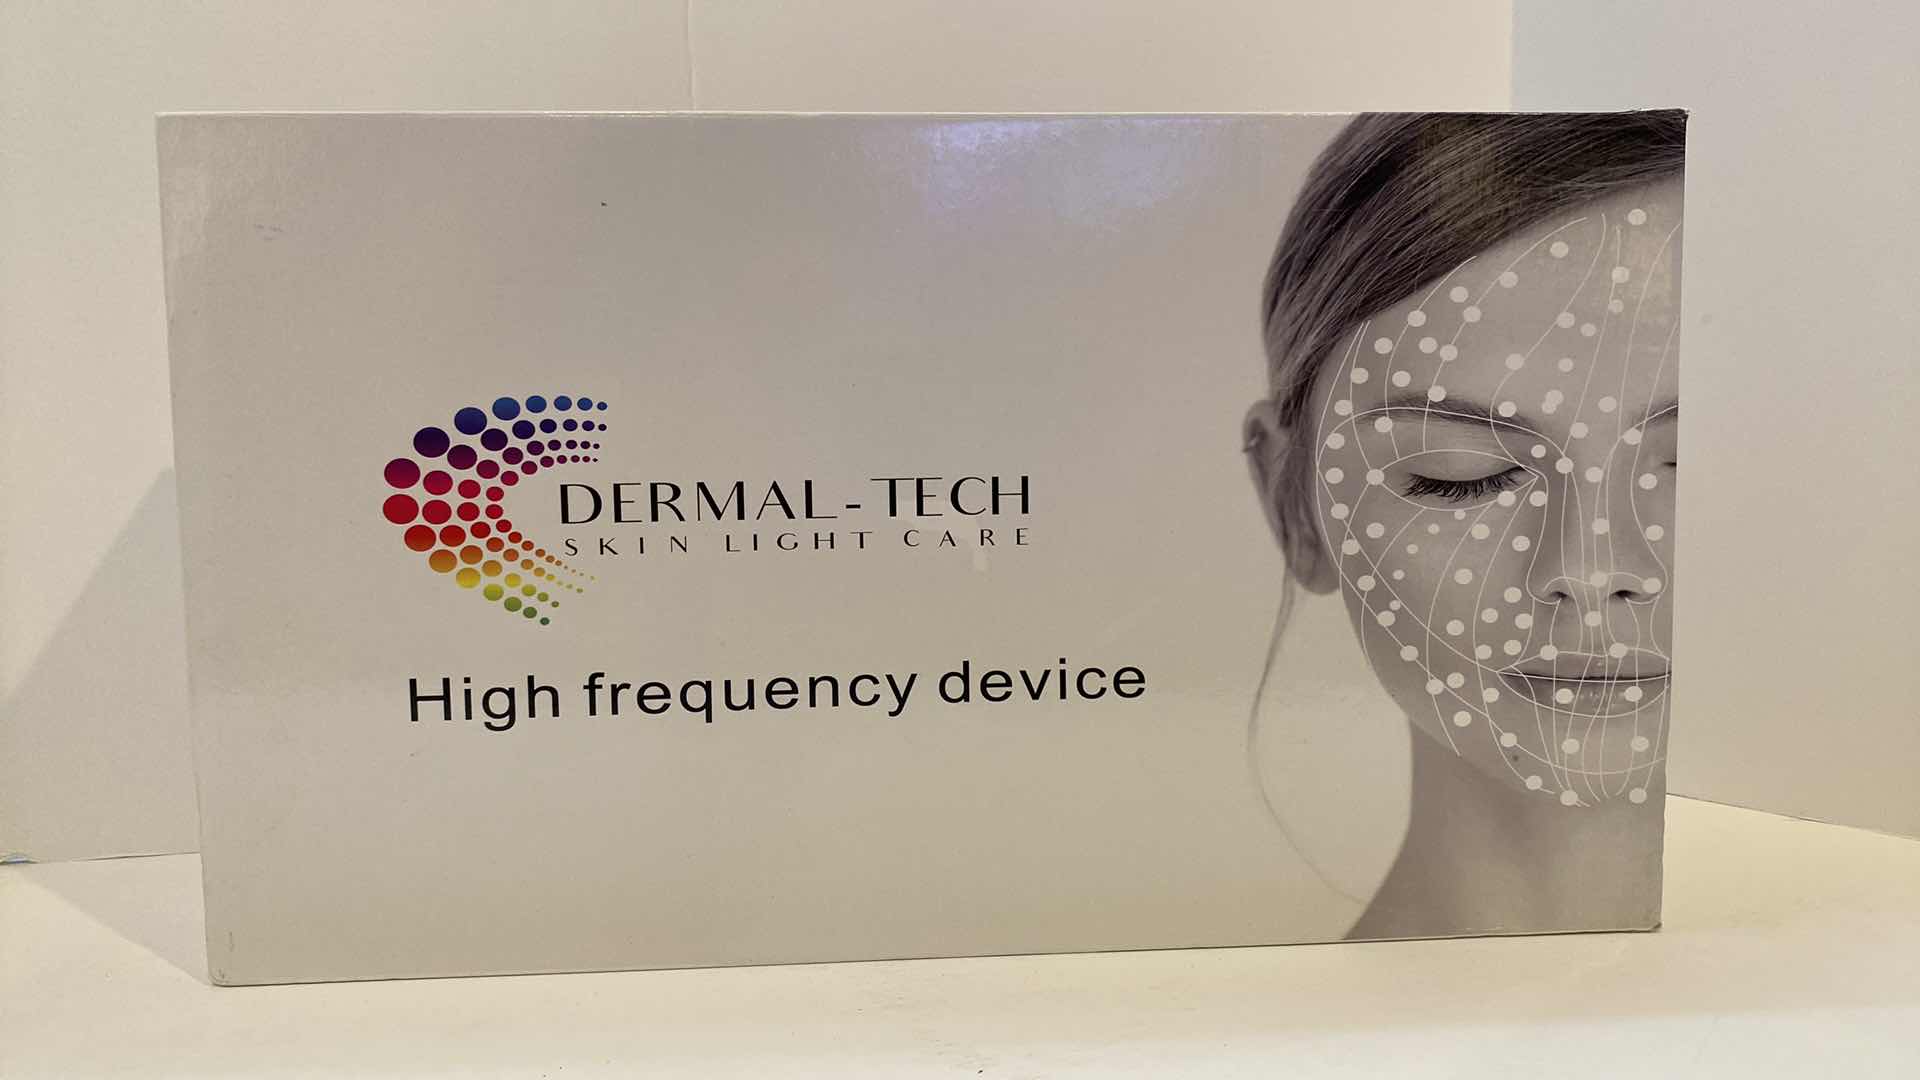 Photo 3 of NEW DERMAL TECH SKIN LIGHT CARE HIGH FREQUENCY DEVICE -  DELIVERS VISIBLE RESULTS TO SKIN $1200